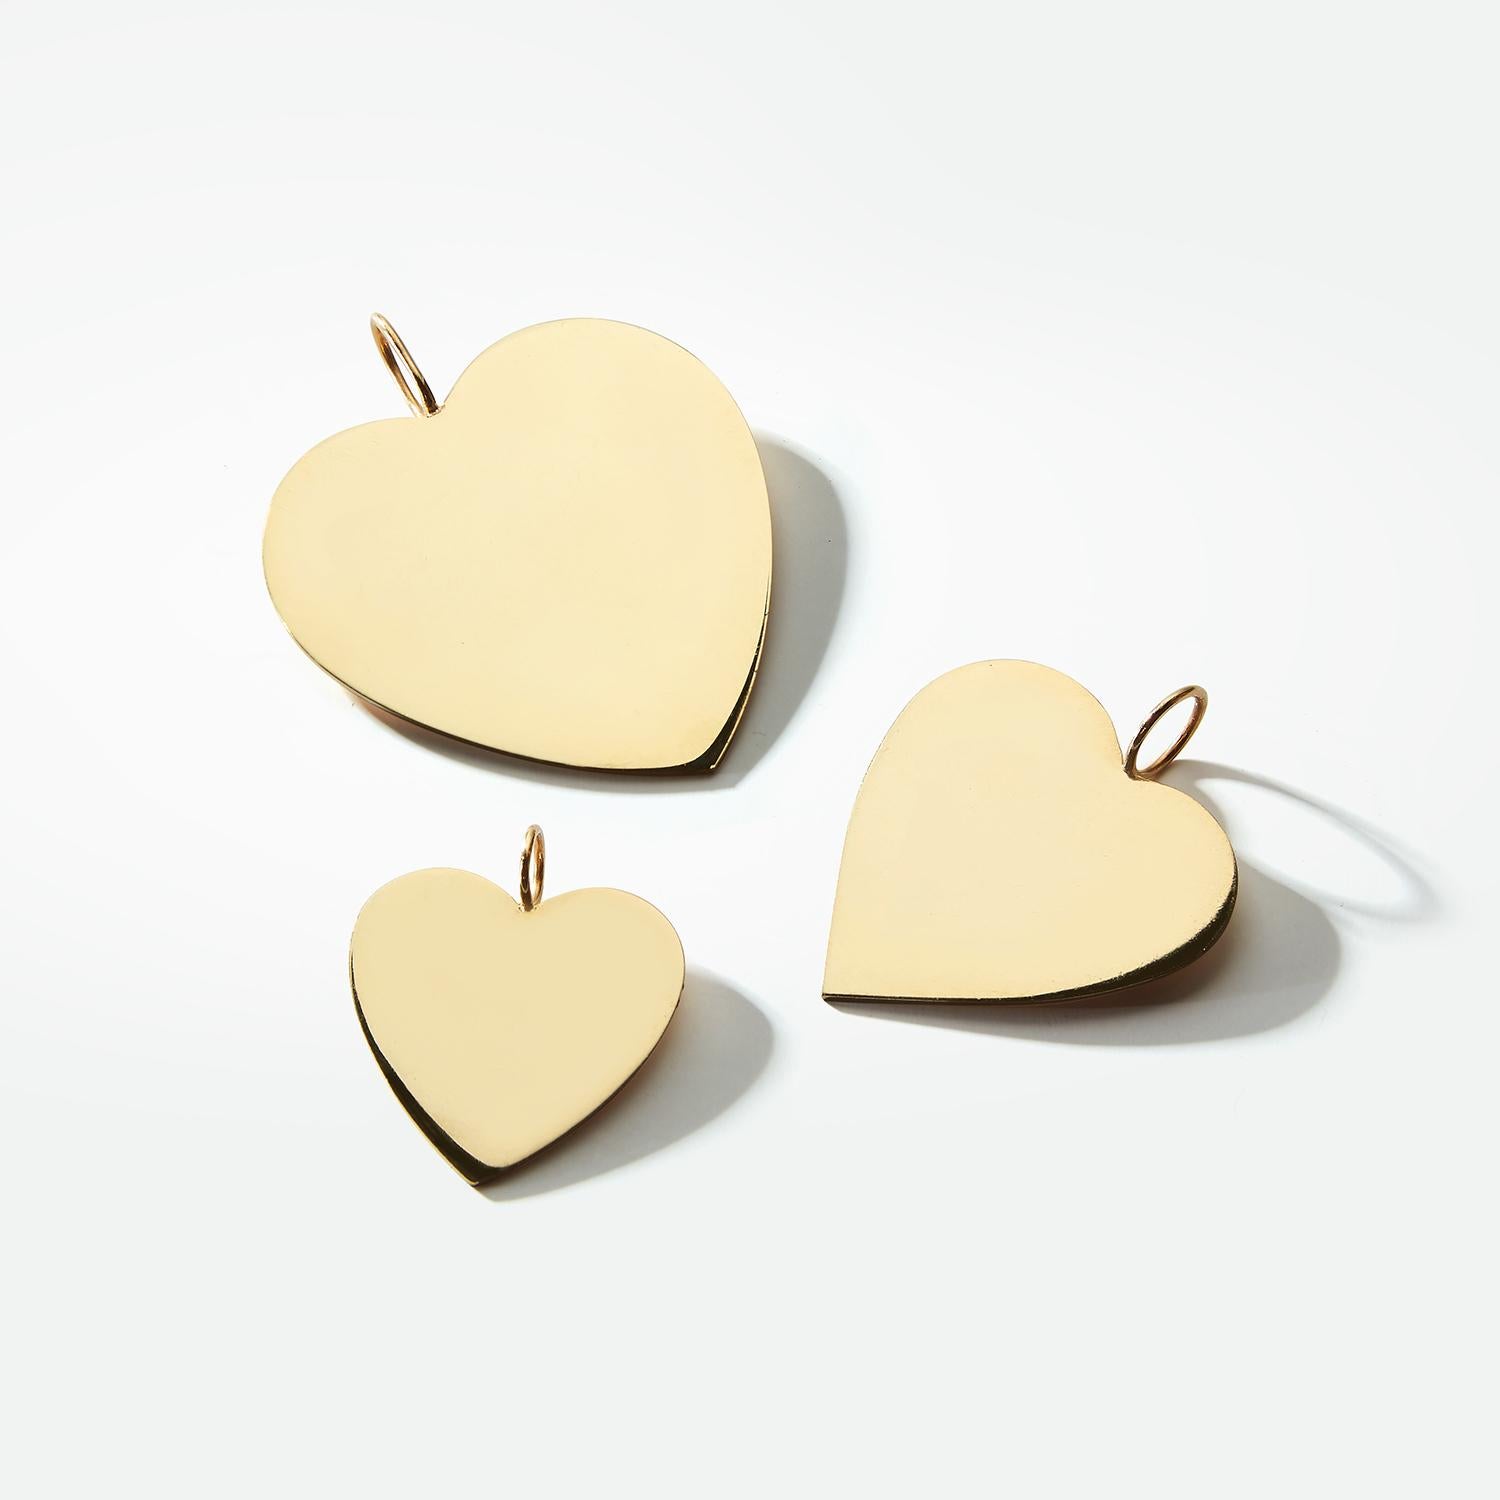 Garland Collection's solid gold heart charms are custom and hand made to order by our master bench jewelers in Los Angeles. Garland's solid gold hearts may be styled in multiple ways -- on a full charm necklace, a single chain or a bracelet. The